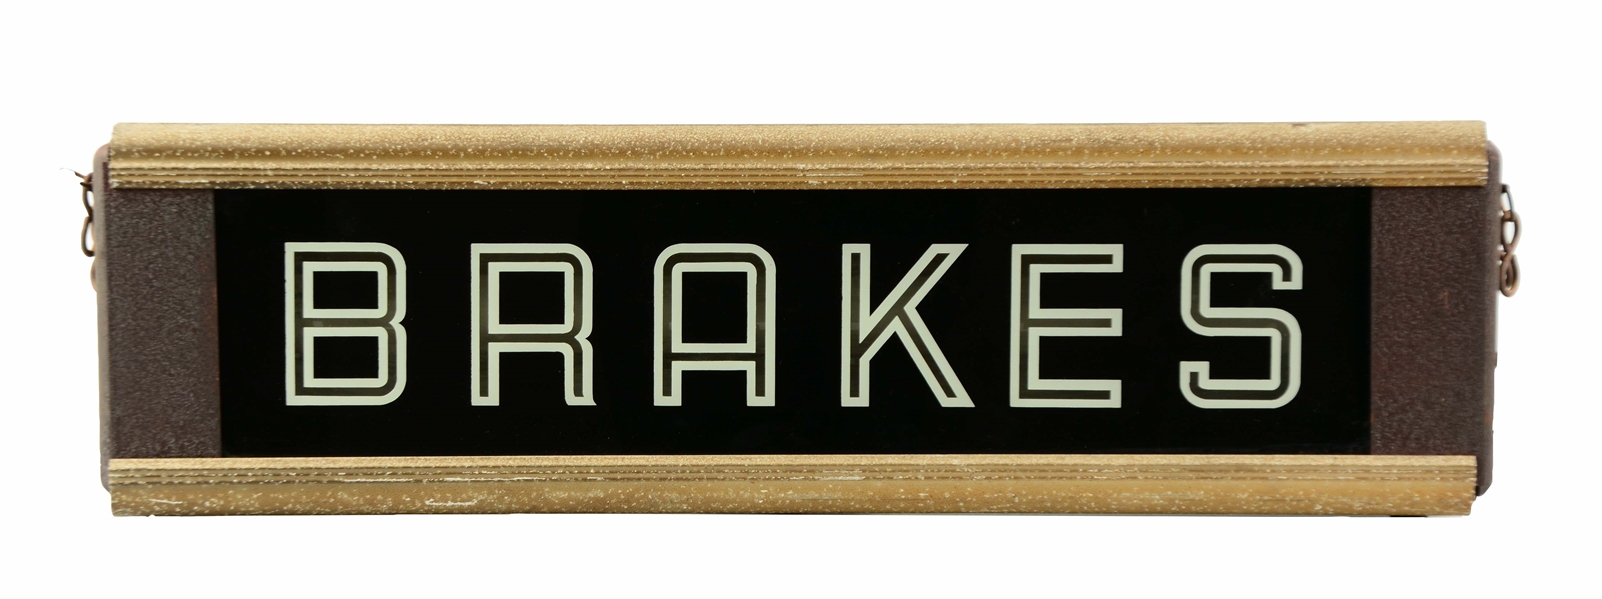 REVERSE GLASS BRAKES COUNTER TOP LIGHT-UP SIGN.